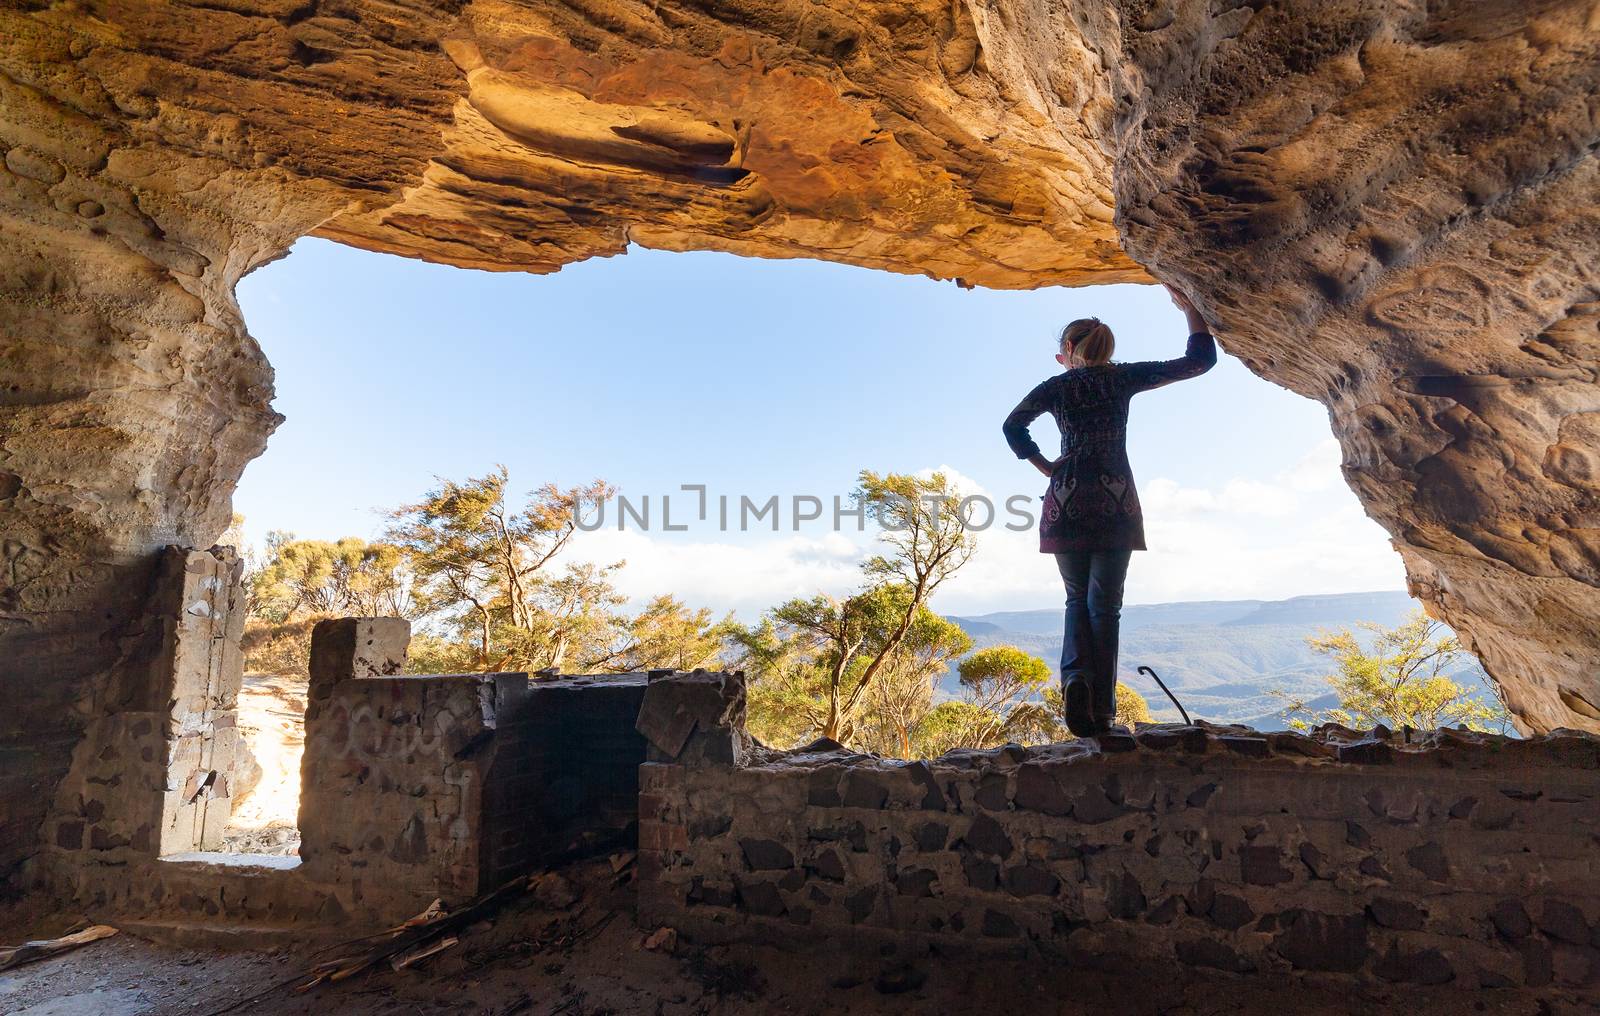 View from inside a cave of a woman looking out to mountain views overlooking Jamison Valley from a cave with a rustic fire pit